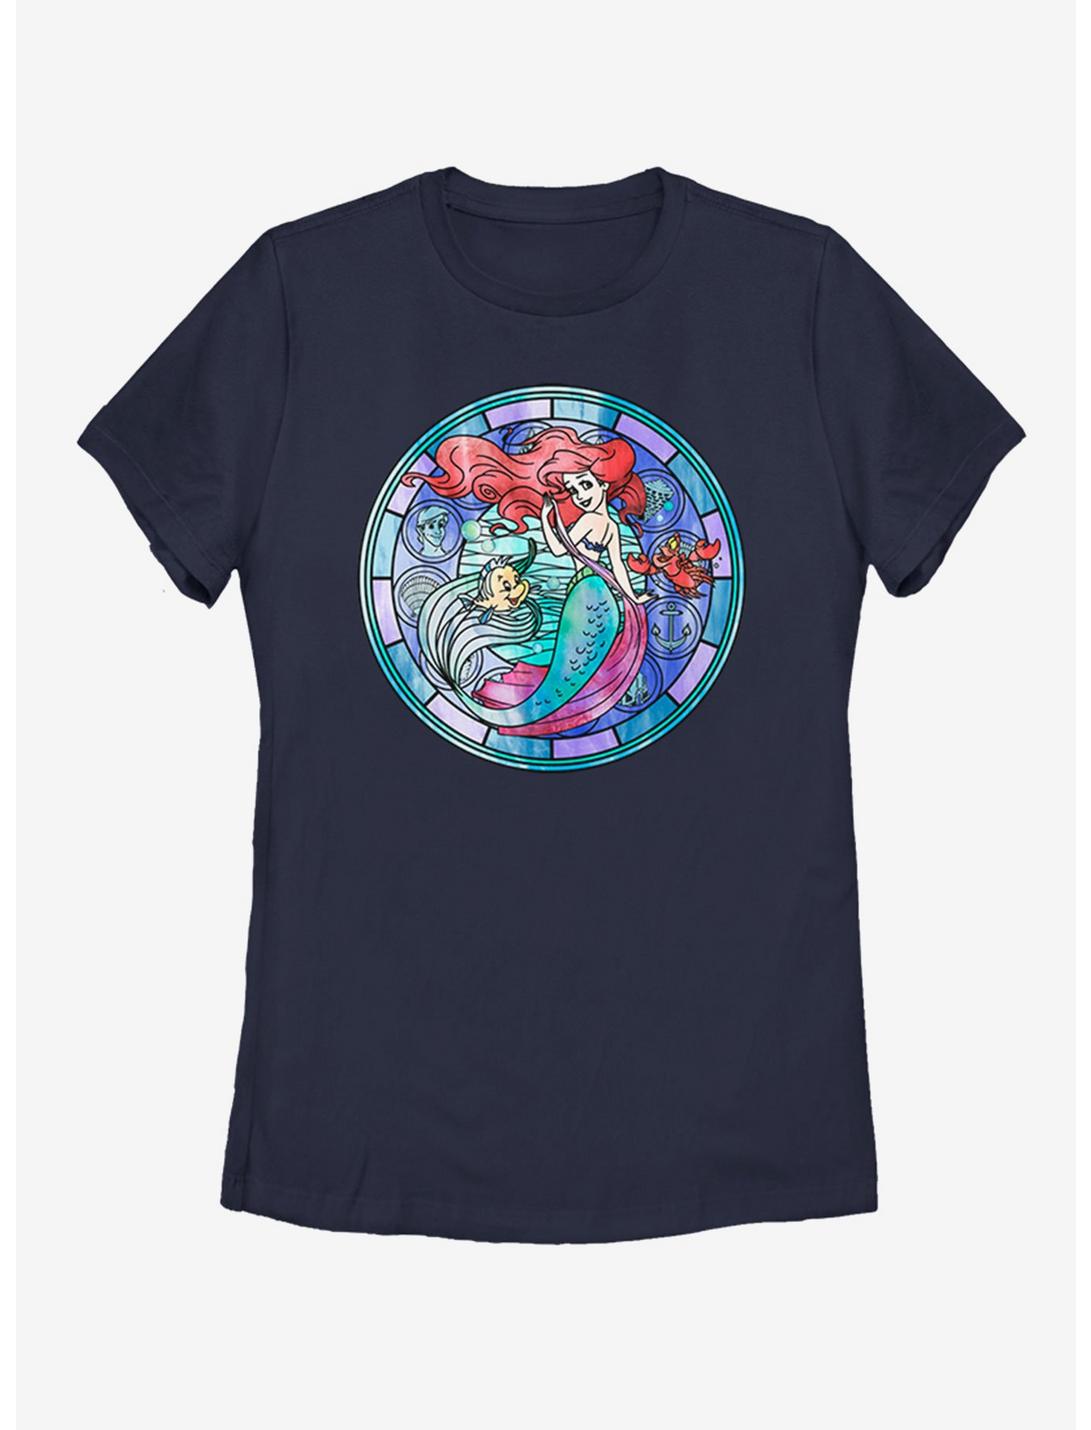 Disney The Little Mermaid Ariel Stained Glass Womens T-Shirt, NAVY, hi-res